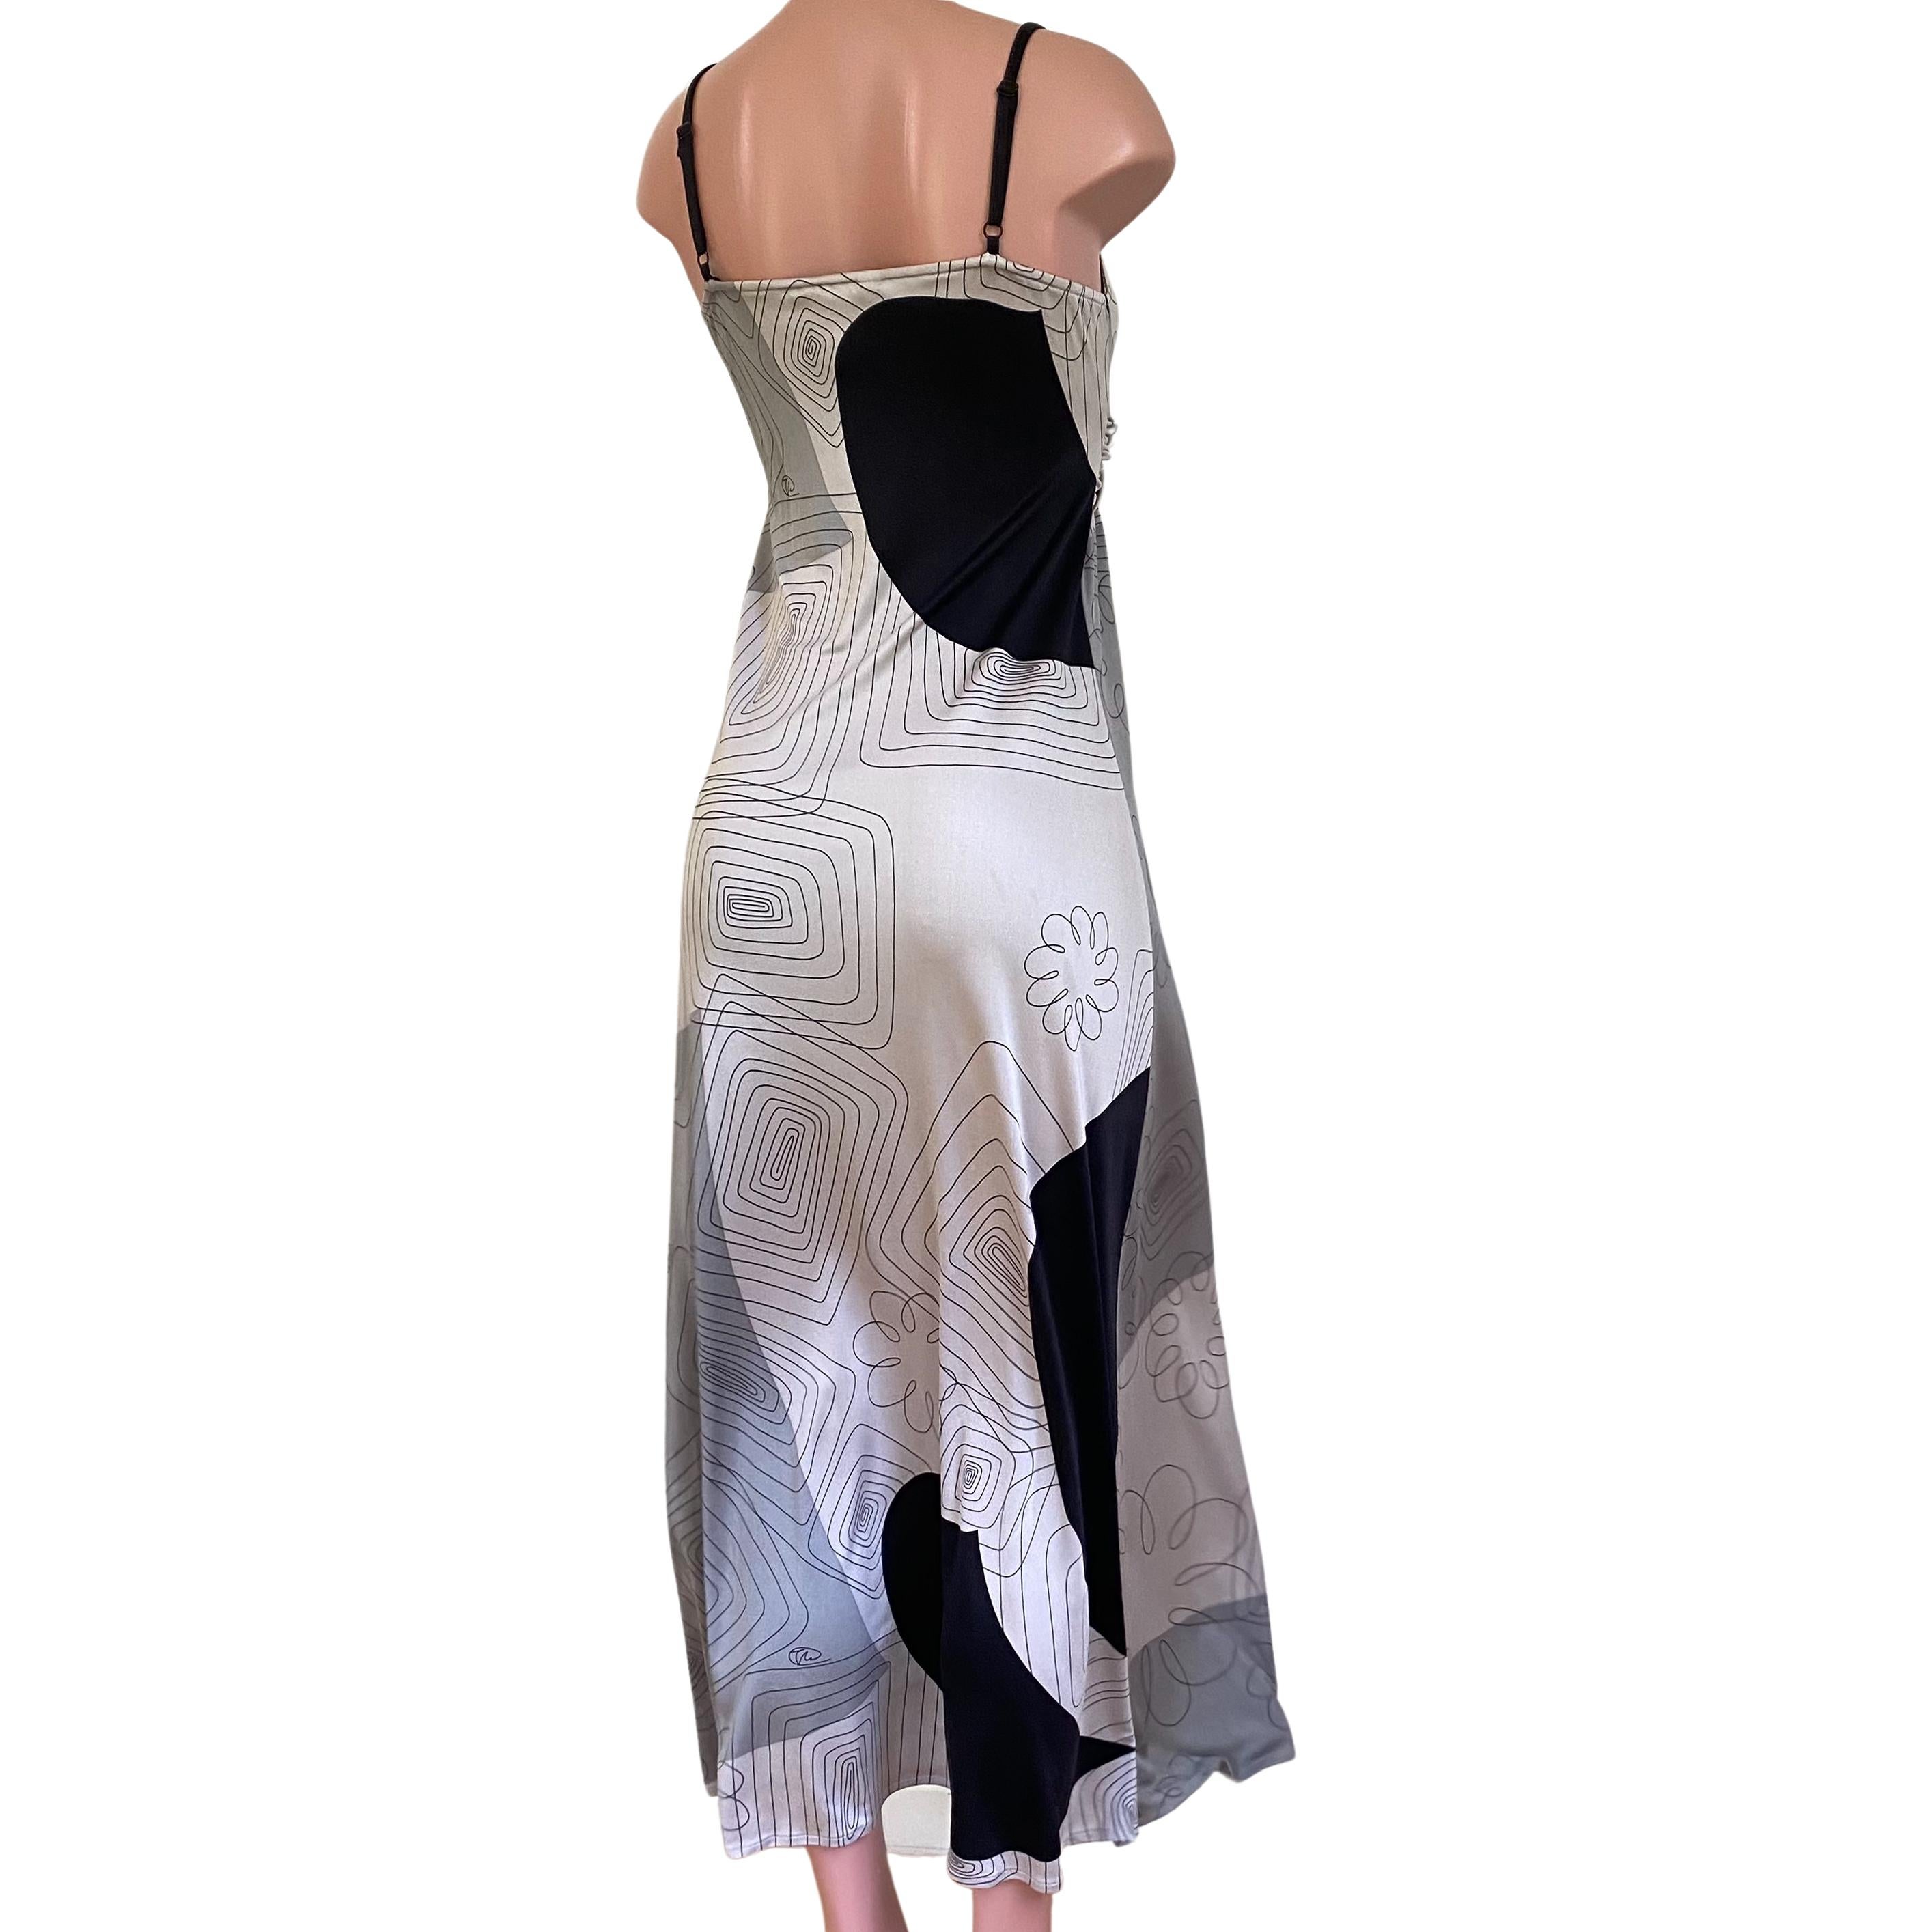 Cool, easy breezy twist front maxi cami dress with adjustable shoulder straps for a perfect, flattering fit.
Original freehand scribble print signed by Flora.
Approximately 57